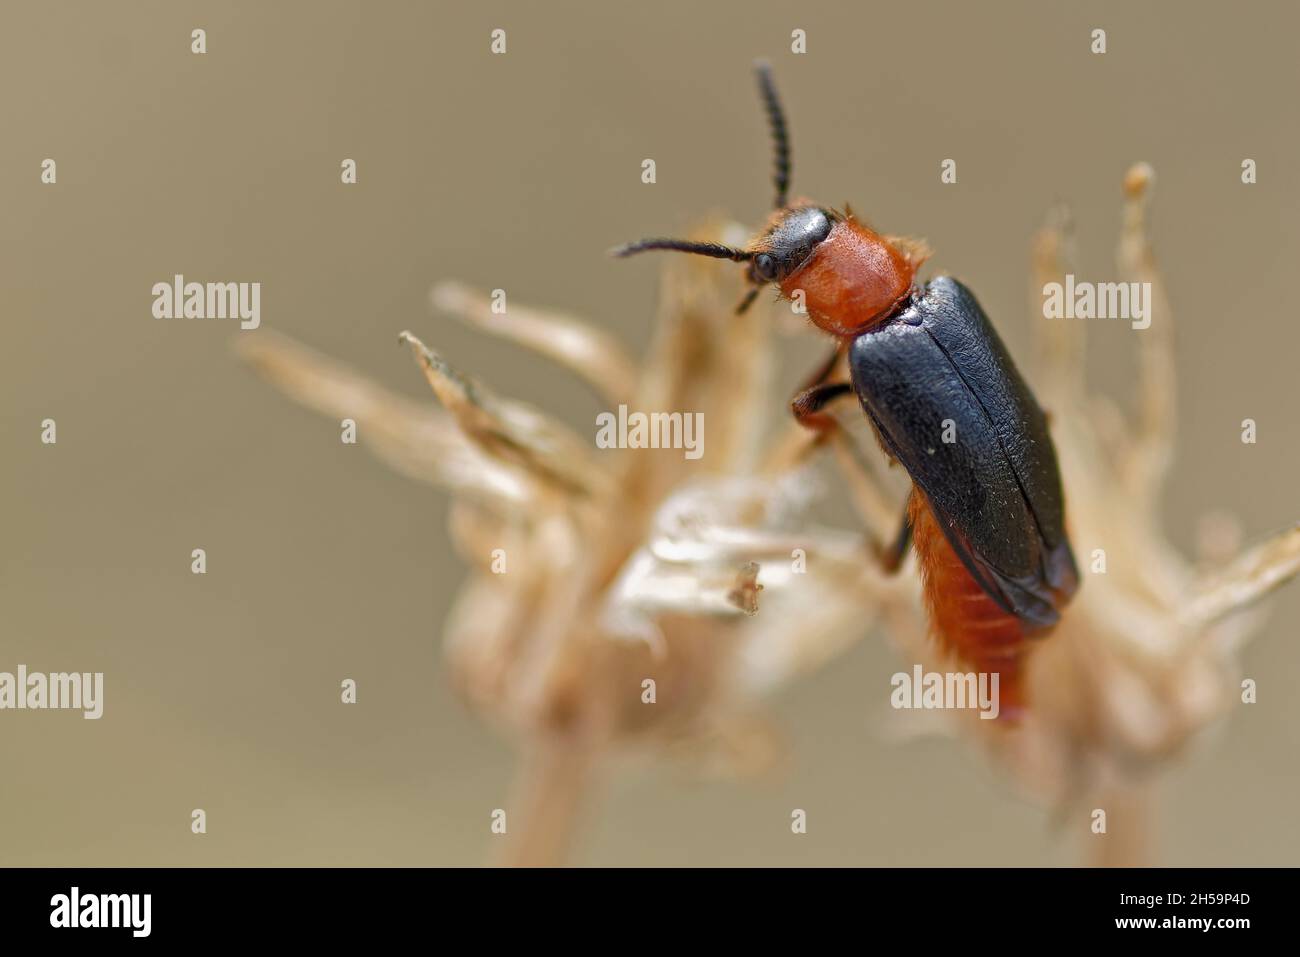 Cantharis pellucida, commonly named 'Soldier beetle'. Stock Photo